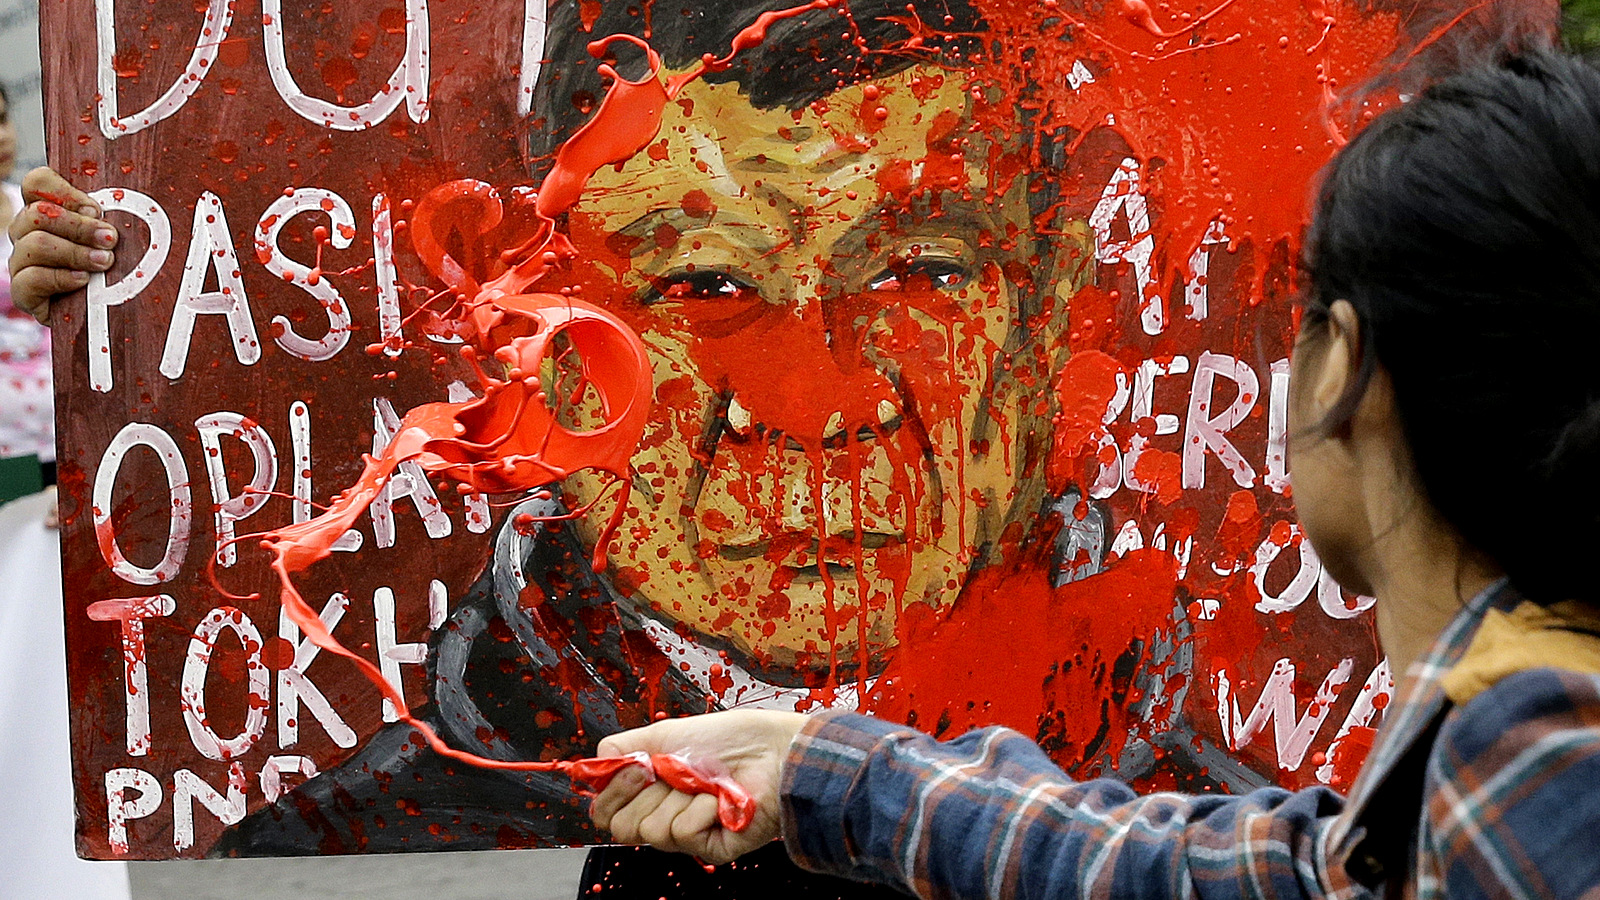 A protester splashes red paint on a picture of Philippine President Rodrigo Duterte as they hold a rally near the Malacanang palace in Manila, Philippines, Dec. 7, 2017. The protesters are condemning the increase in the alleged killings of activists and intensified military operations against communist rebels after Duterte officially terminated peace talks with the insurgents. (AP/Aaron Favila)